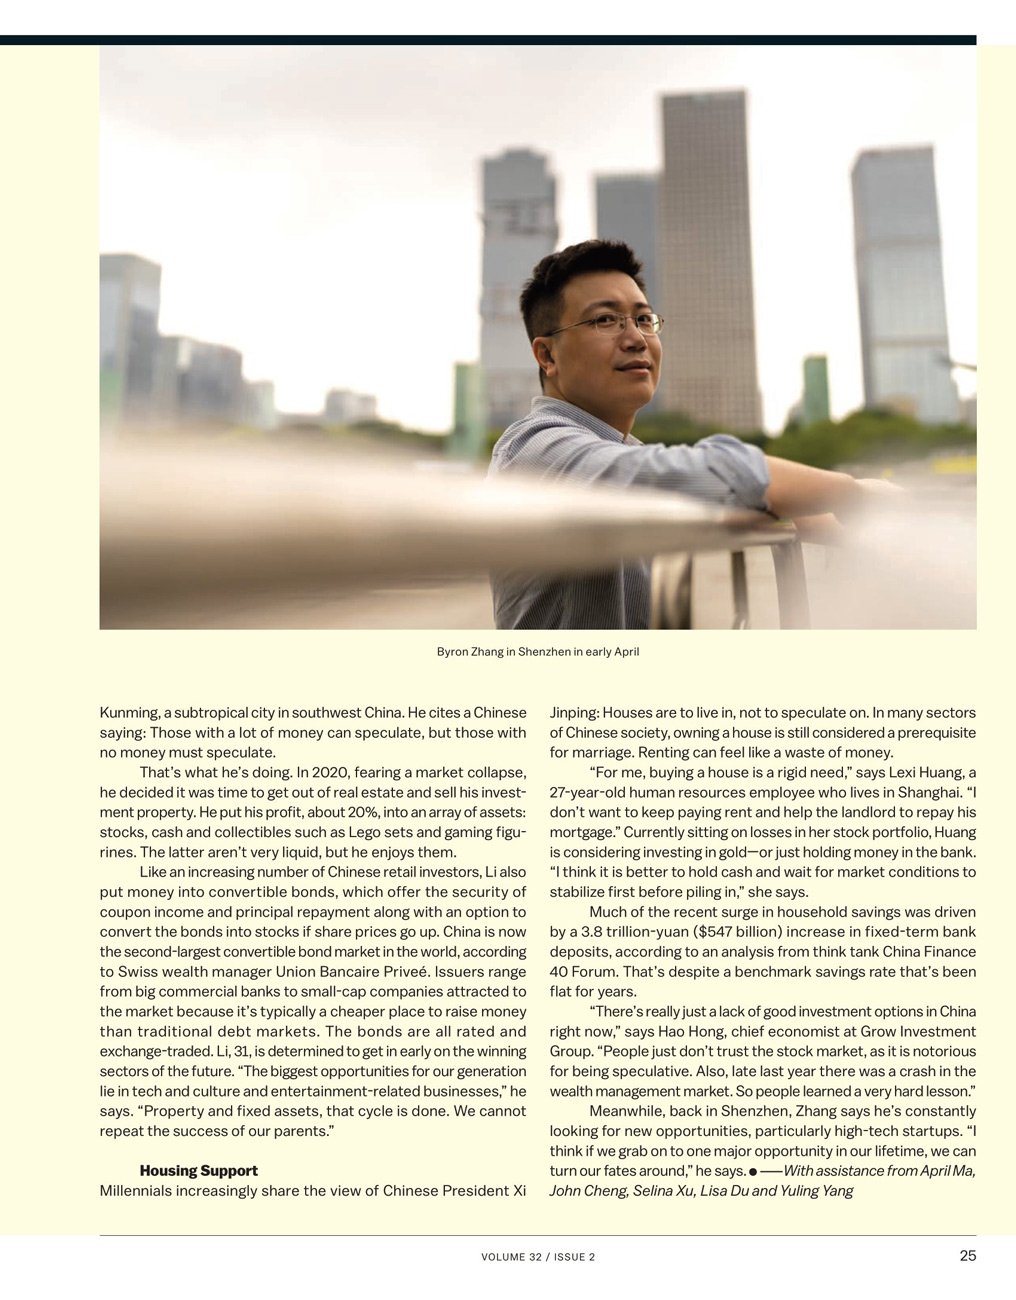  Byron Zhangan co-founded a pharmaceutical startup in Shenzhen  photographed in Shenzhen, China on April 3, 2023 